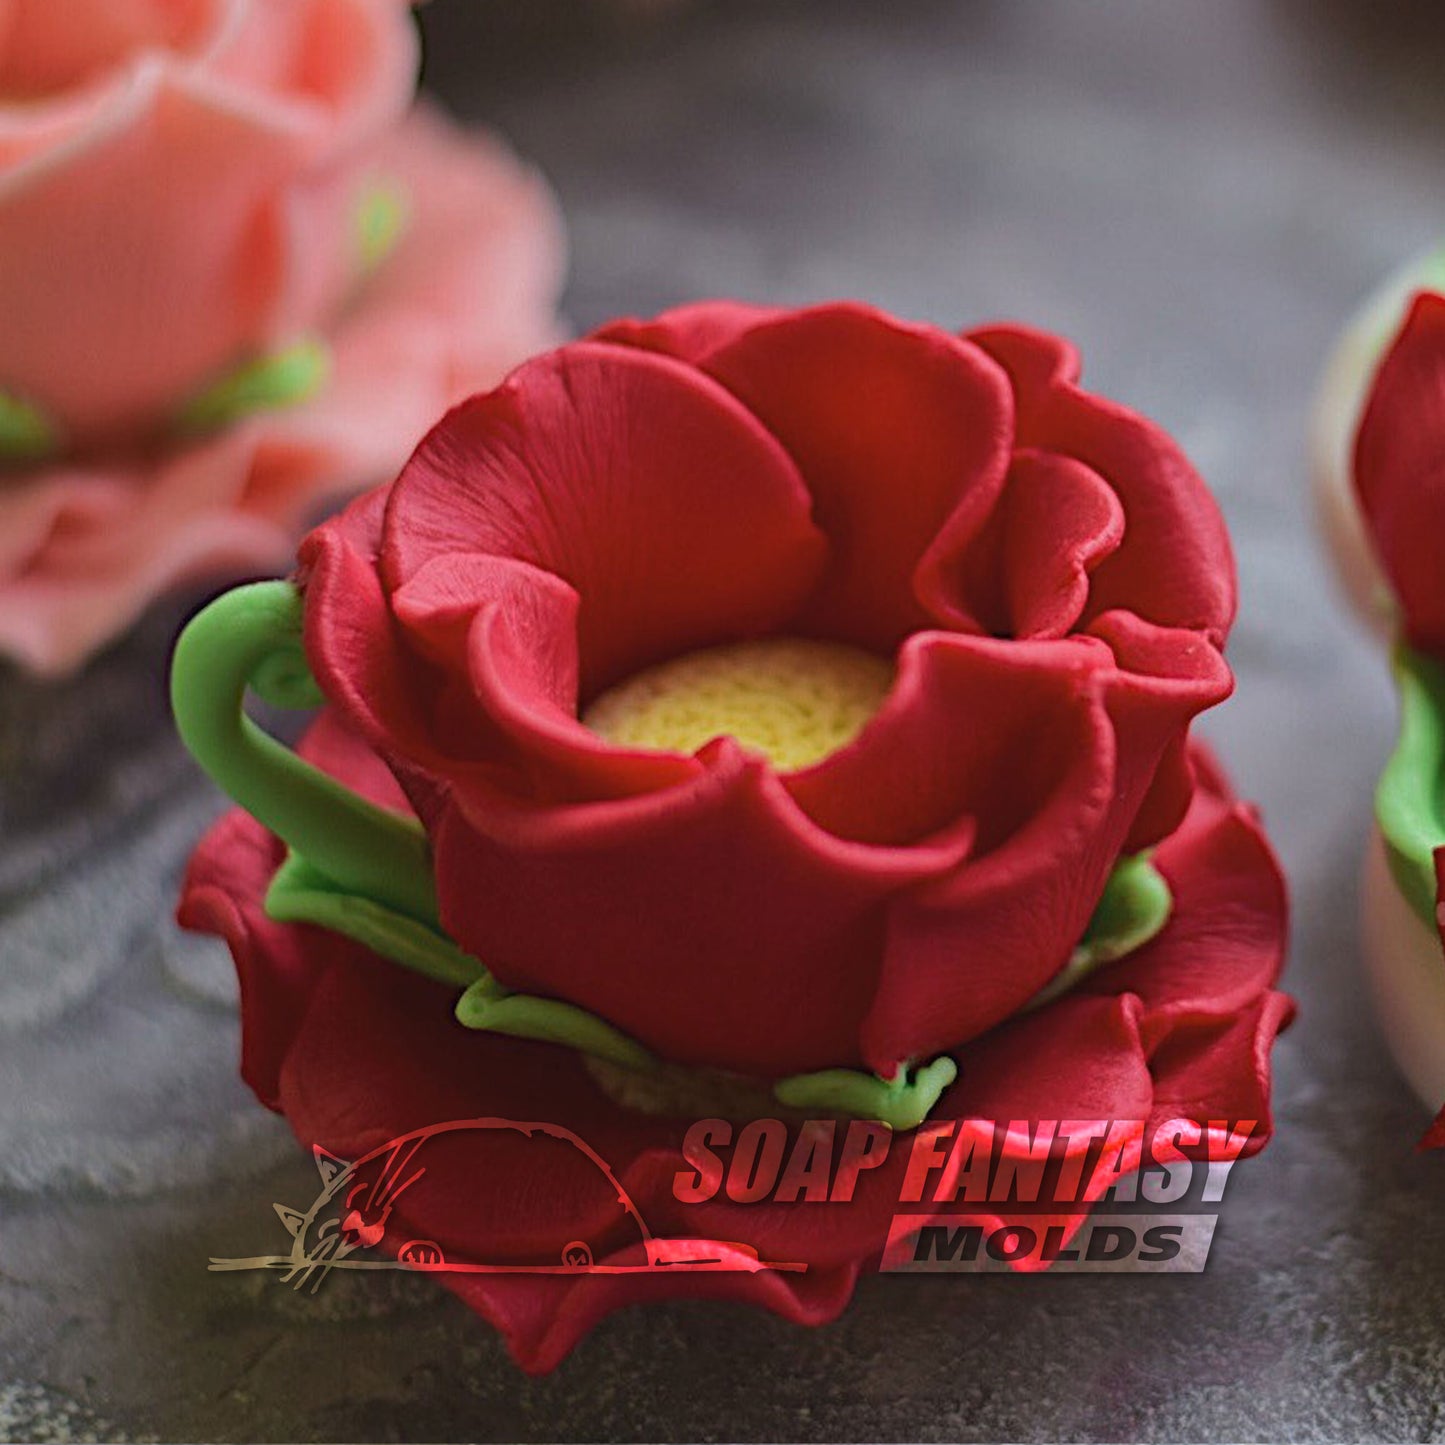 Rose cup and saucer silicone mold for soap making